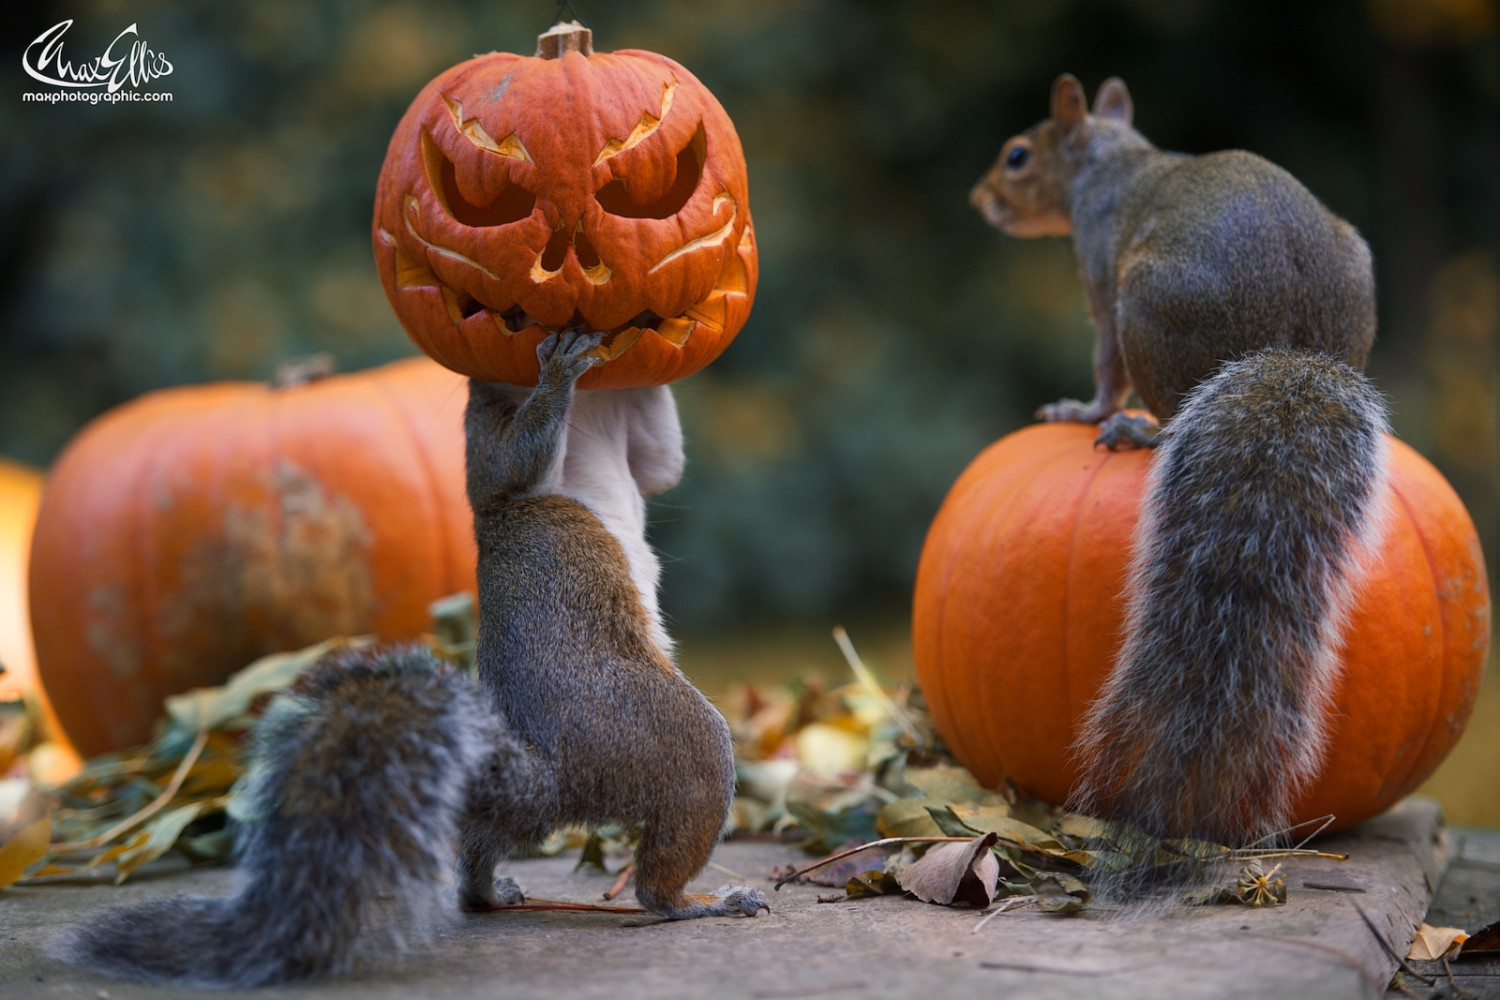 The Story Behind the Most Popular Halloween Photo on 500px